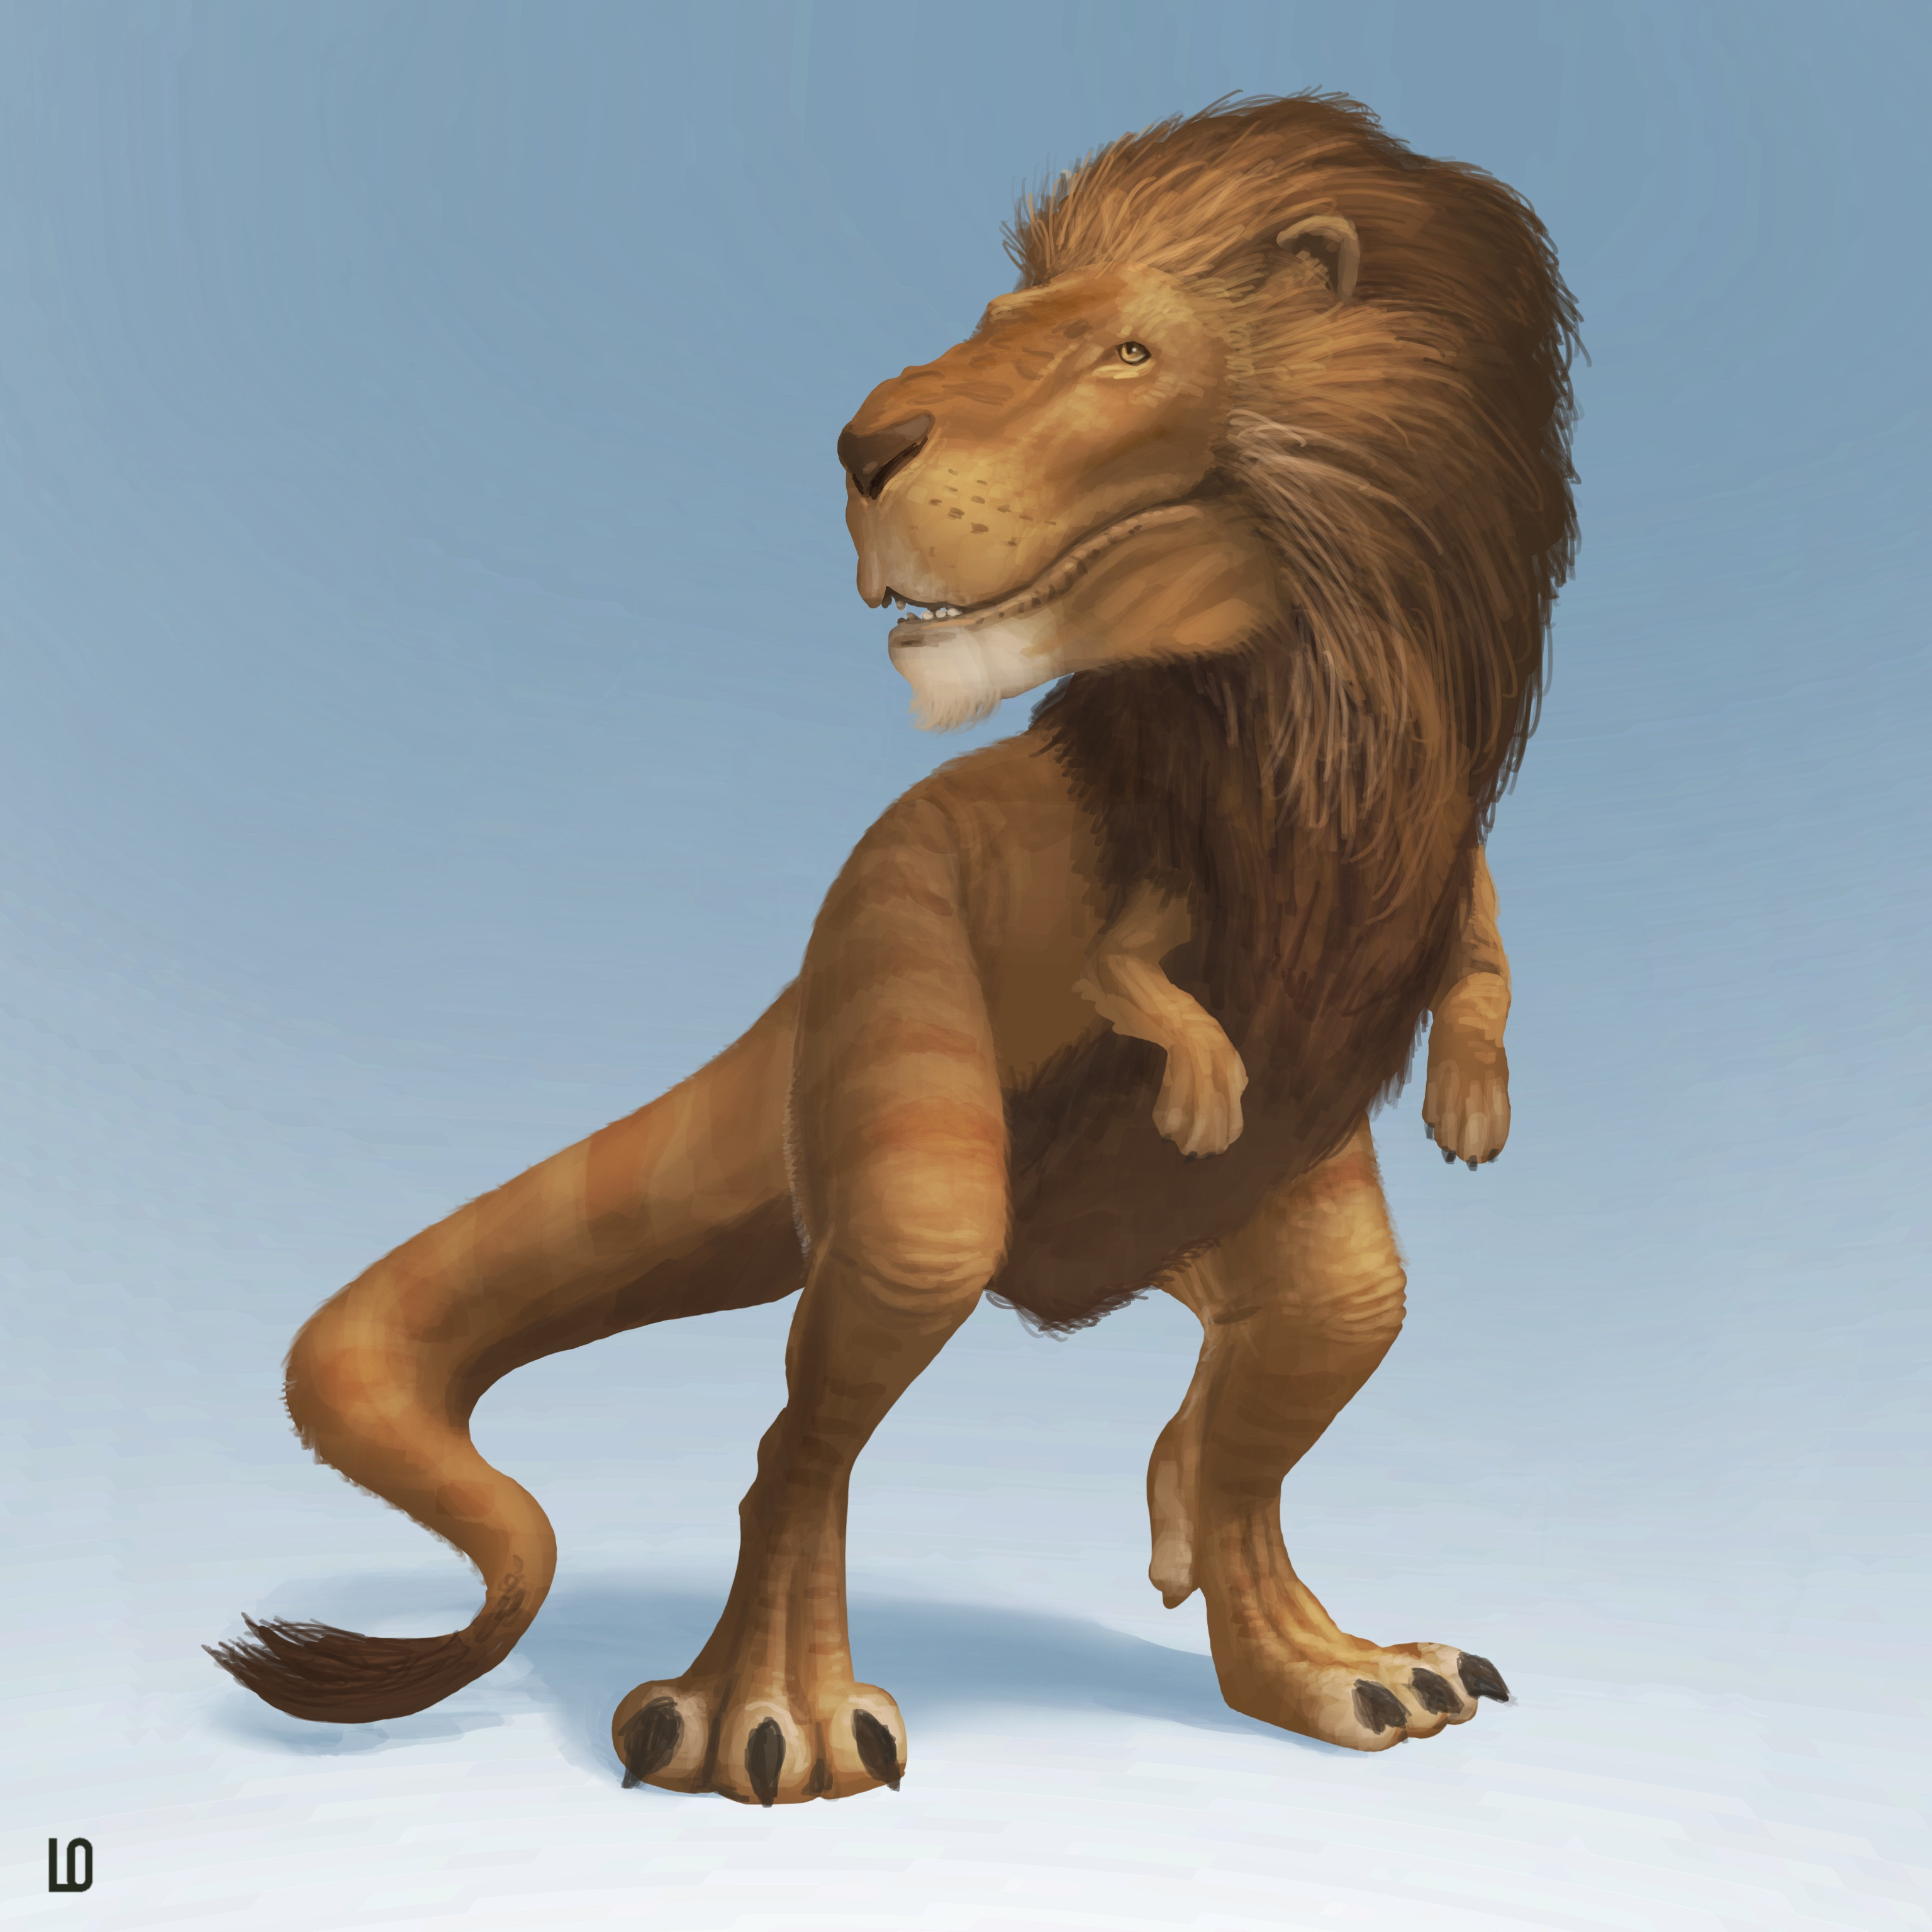 The majestic Lionsaurus Rex (2 hours and half)